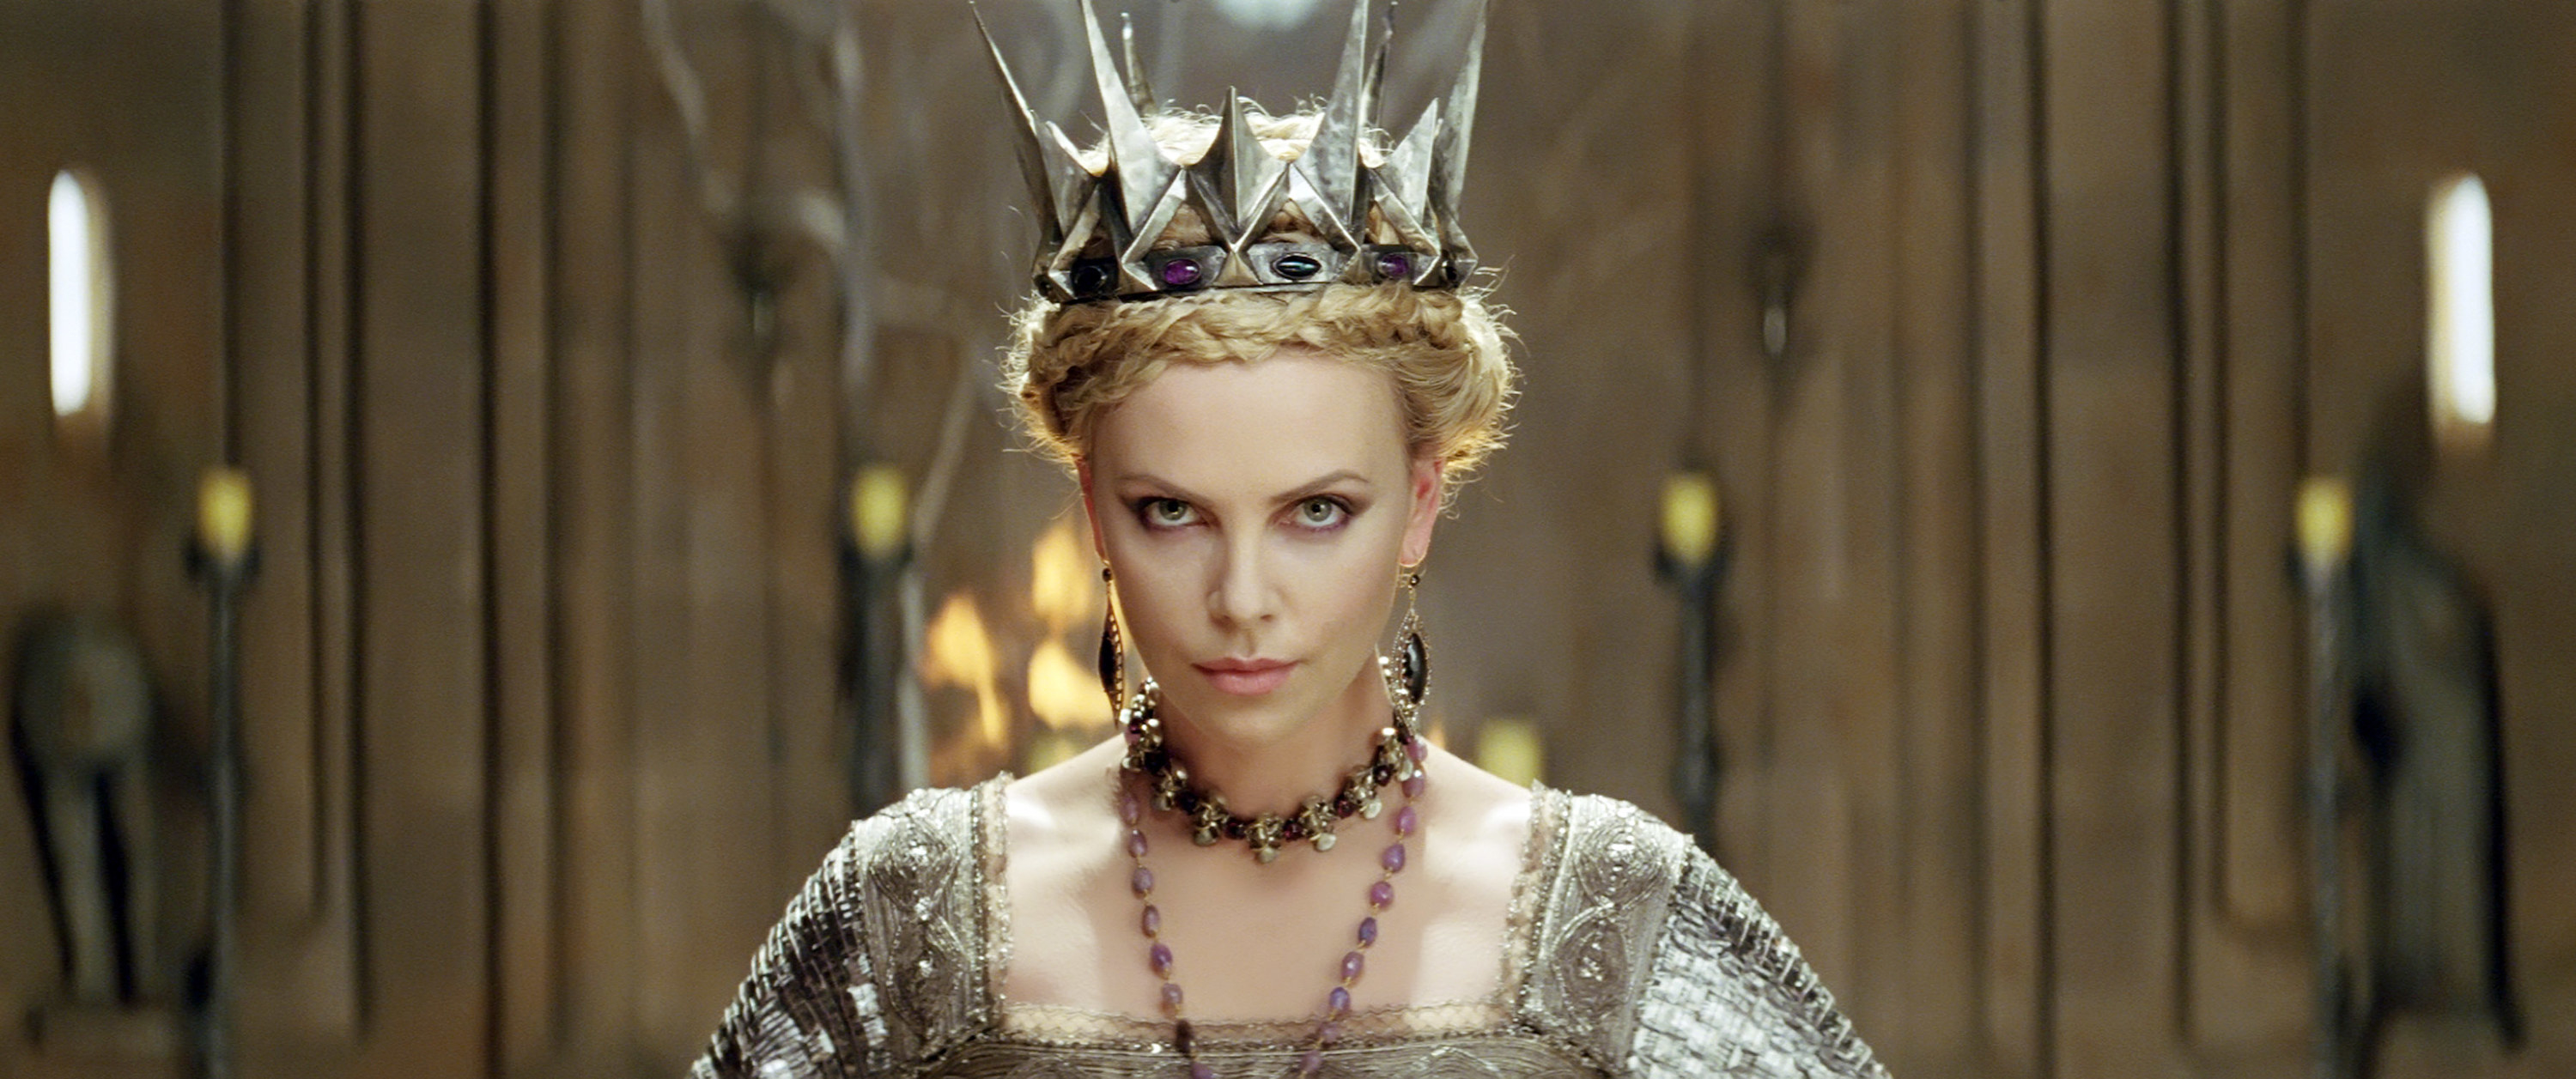 balancing a heavy crown on her head, the queen glares into the camera